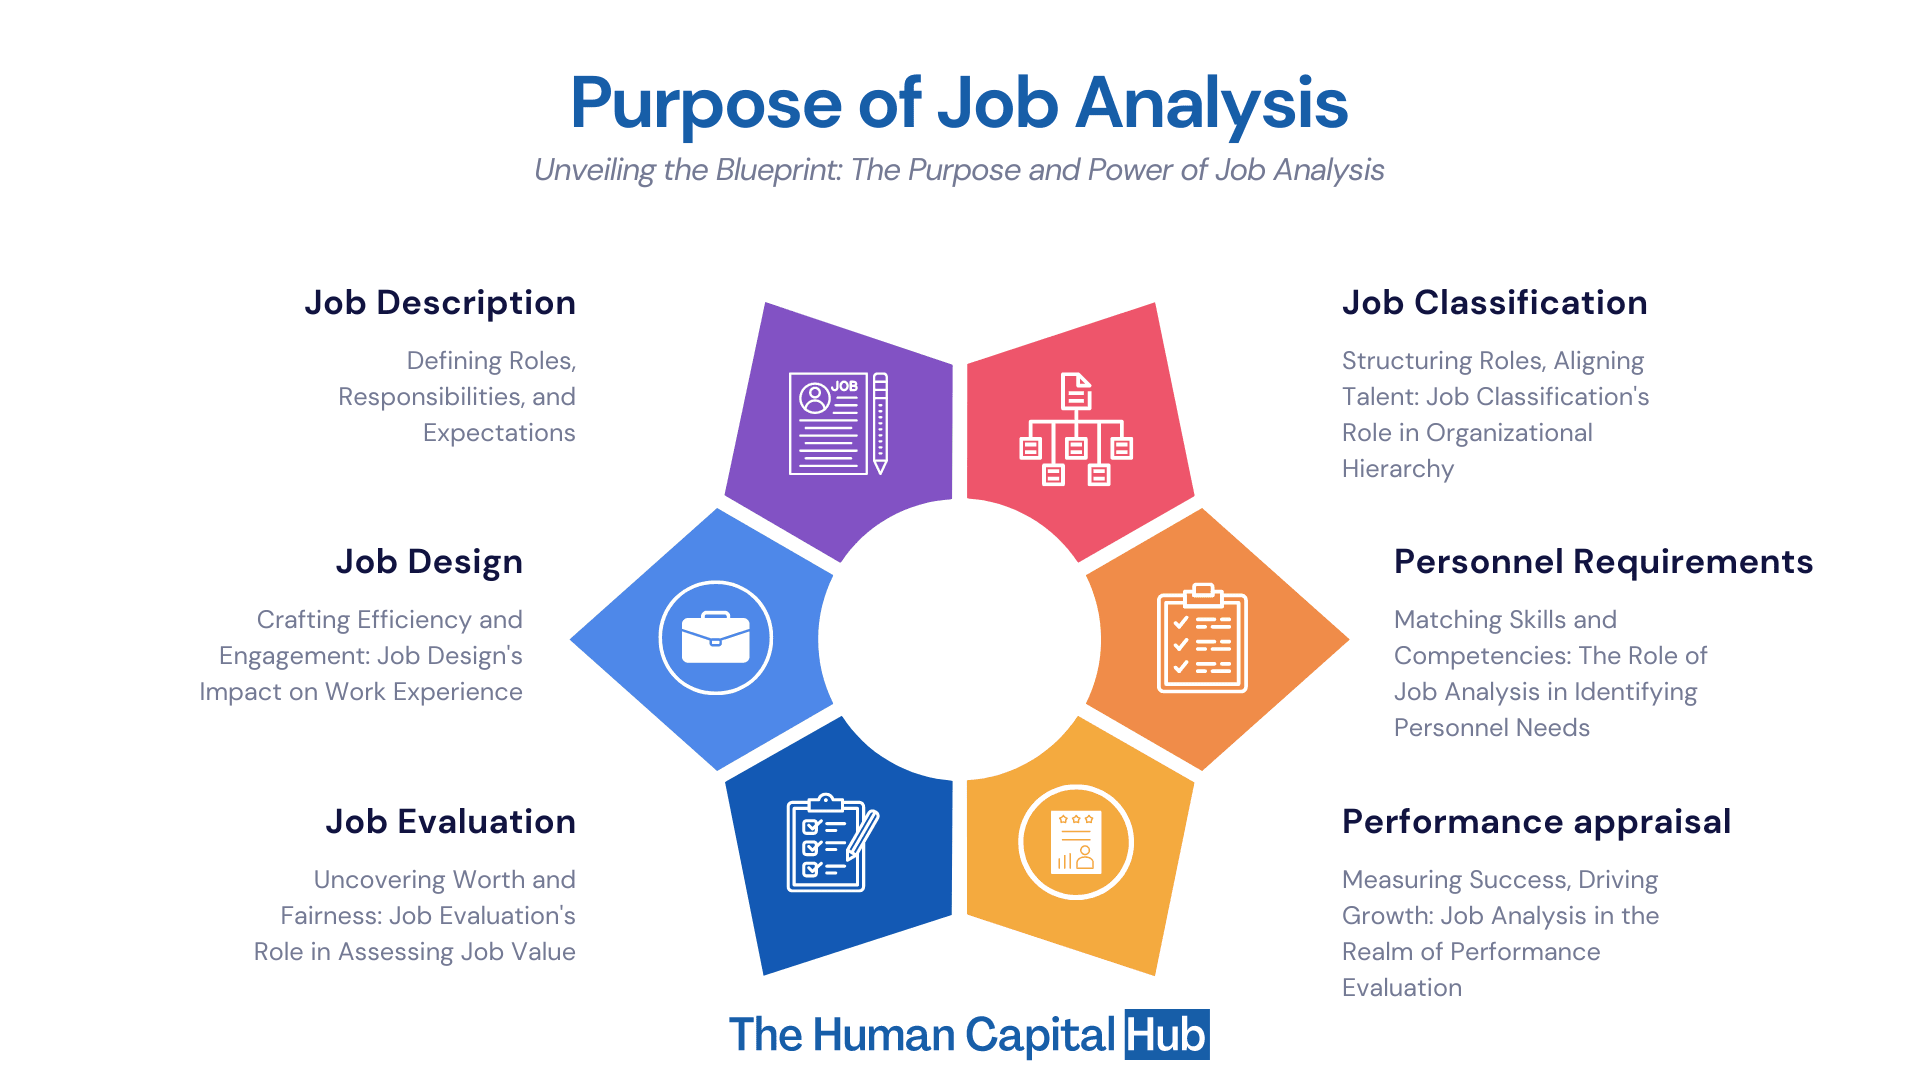 A practitioners guide to the types of Job Analysis